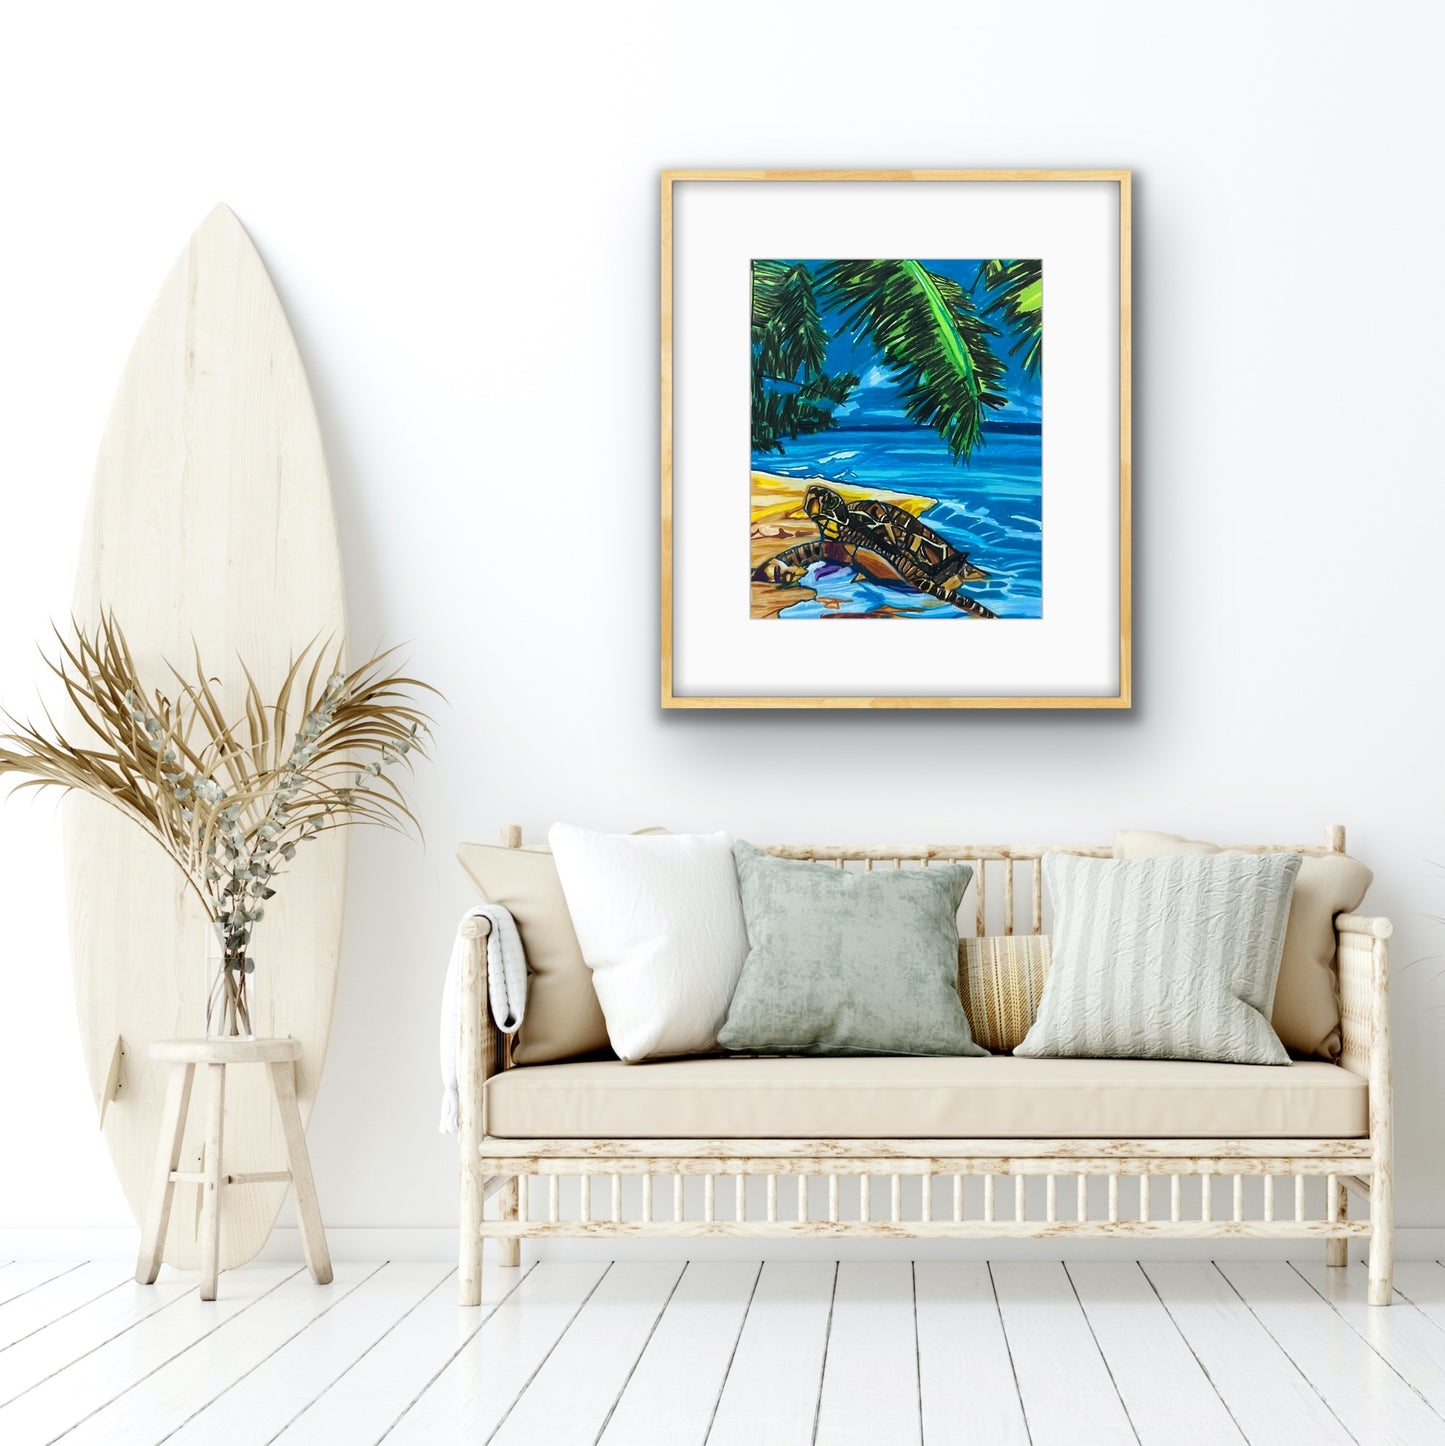 Turtle on the shore - Print, Poster or a Stretched Canvas Print